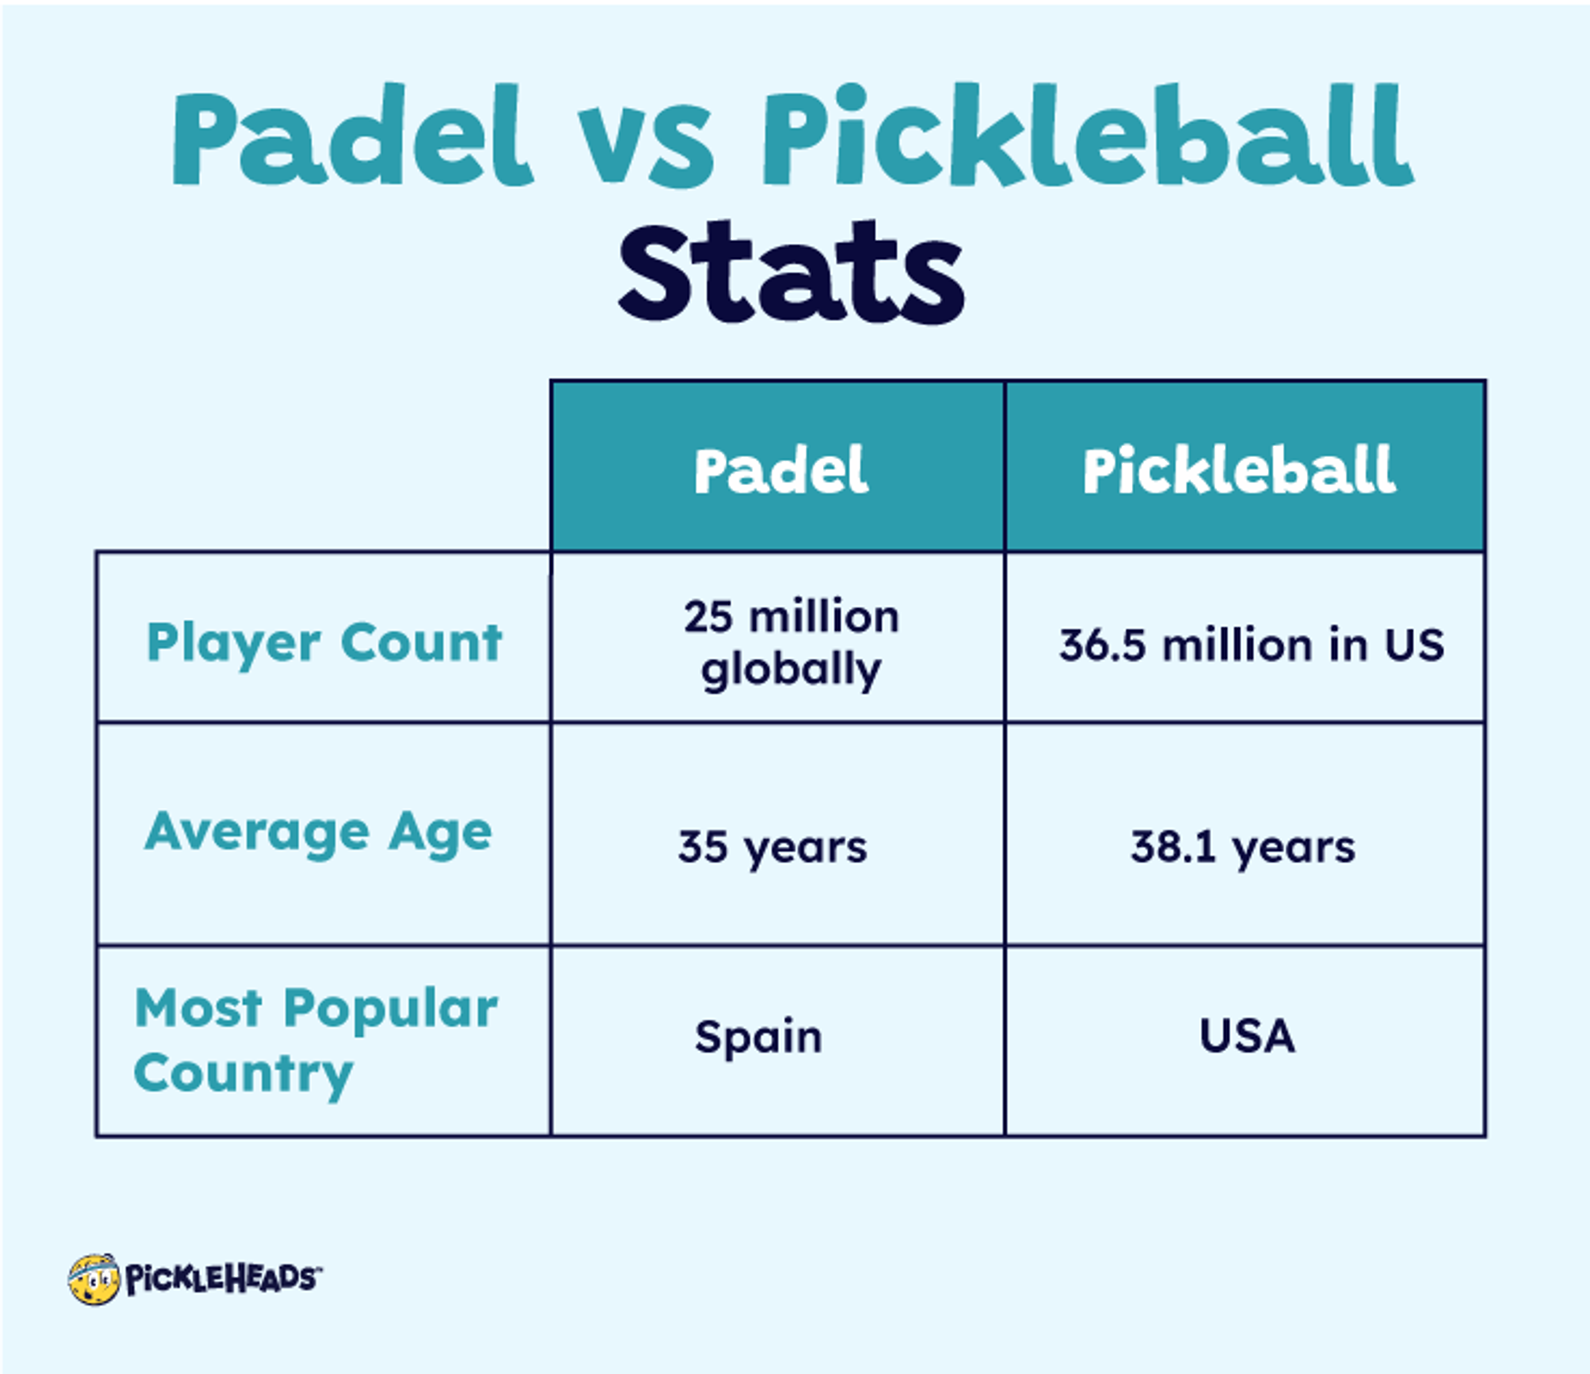 Graphic showing the statistics for padel vs pickleball